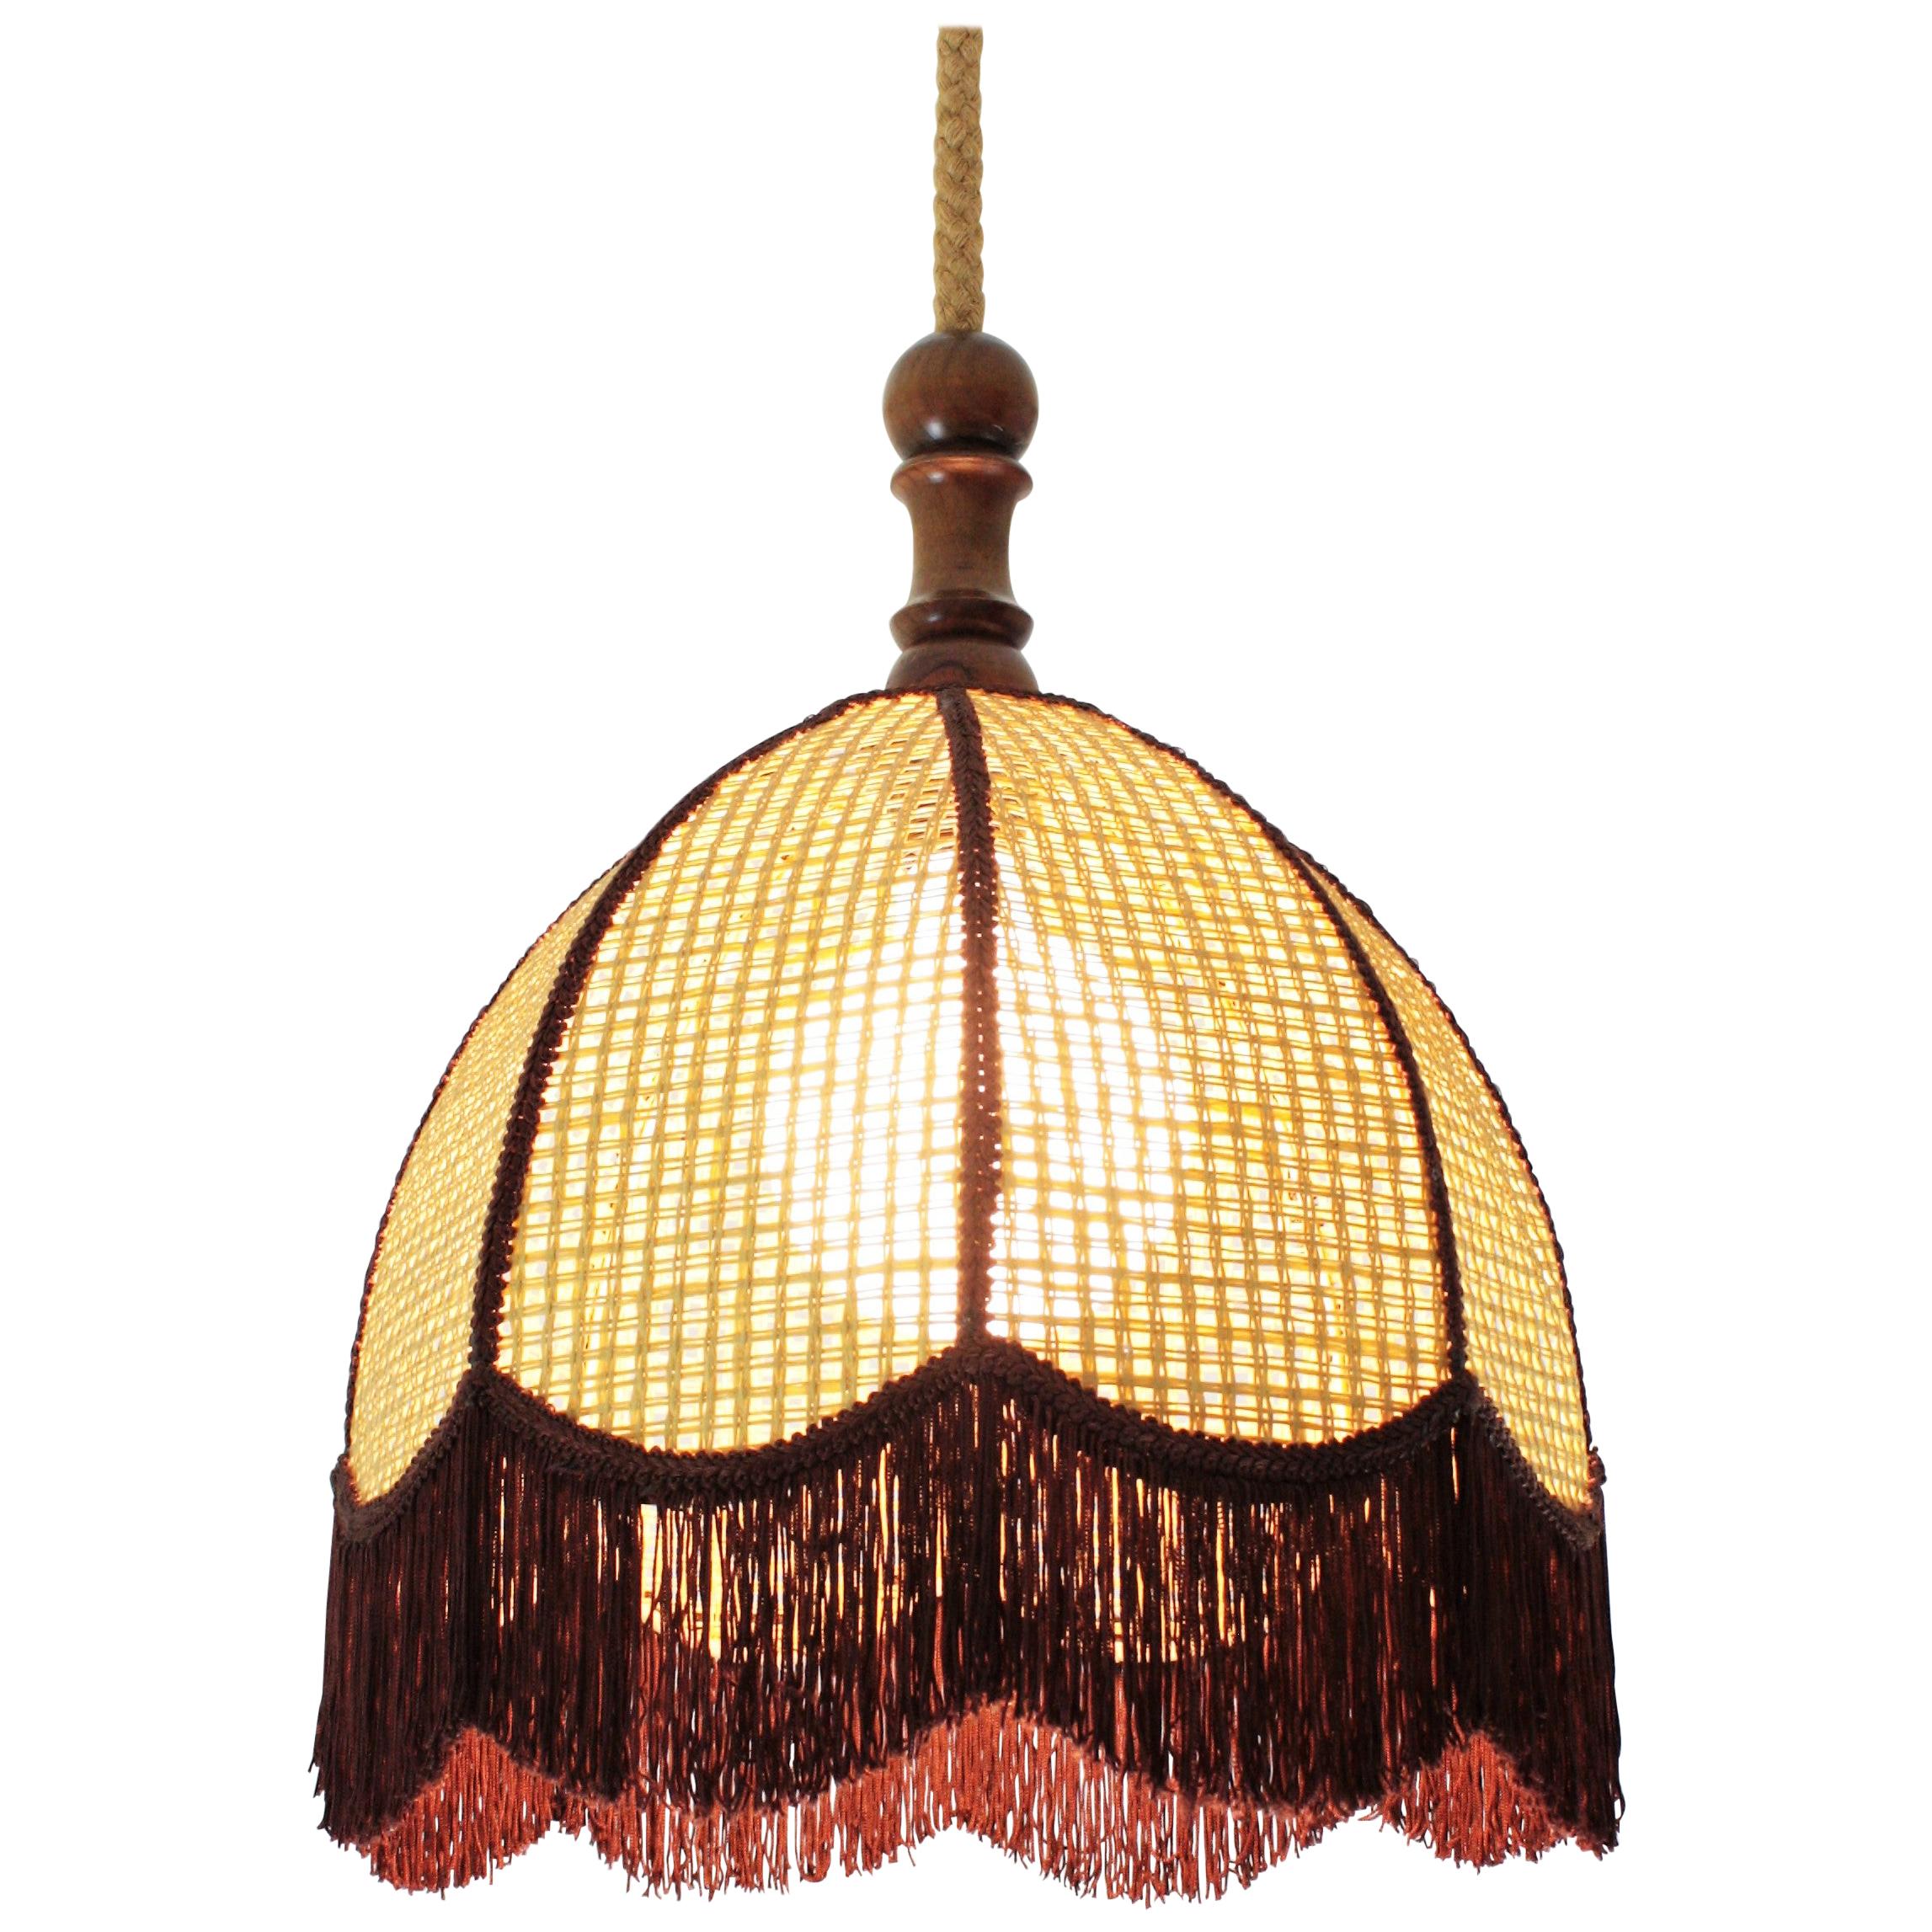 Rattan Wicker Bell Pendant Hanging Lamp with Fringe, Spain, 1970s